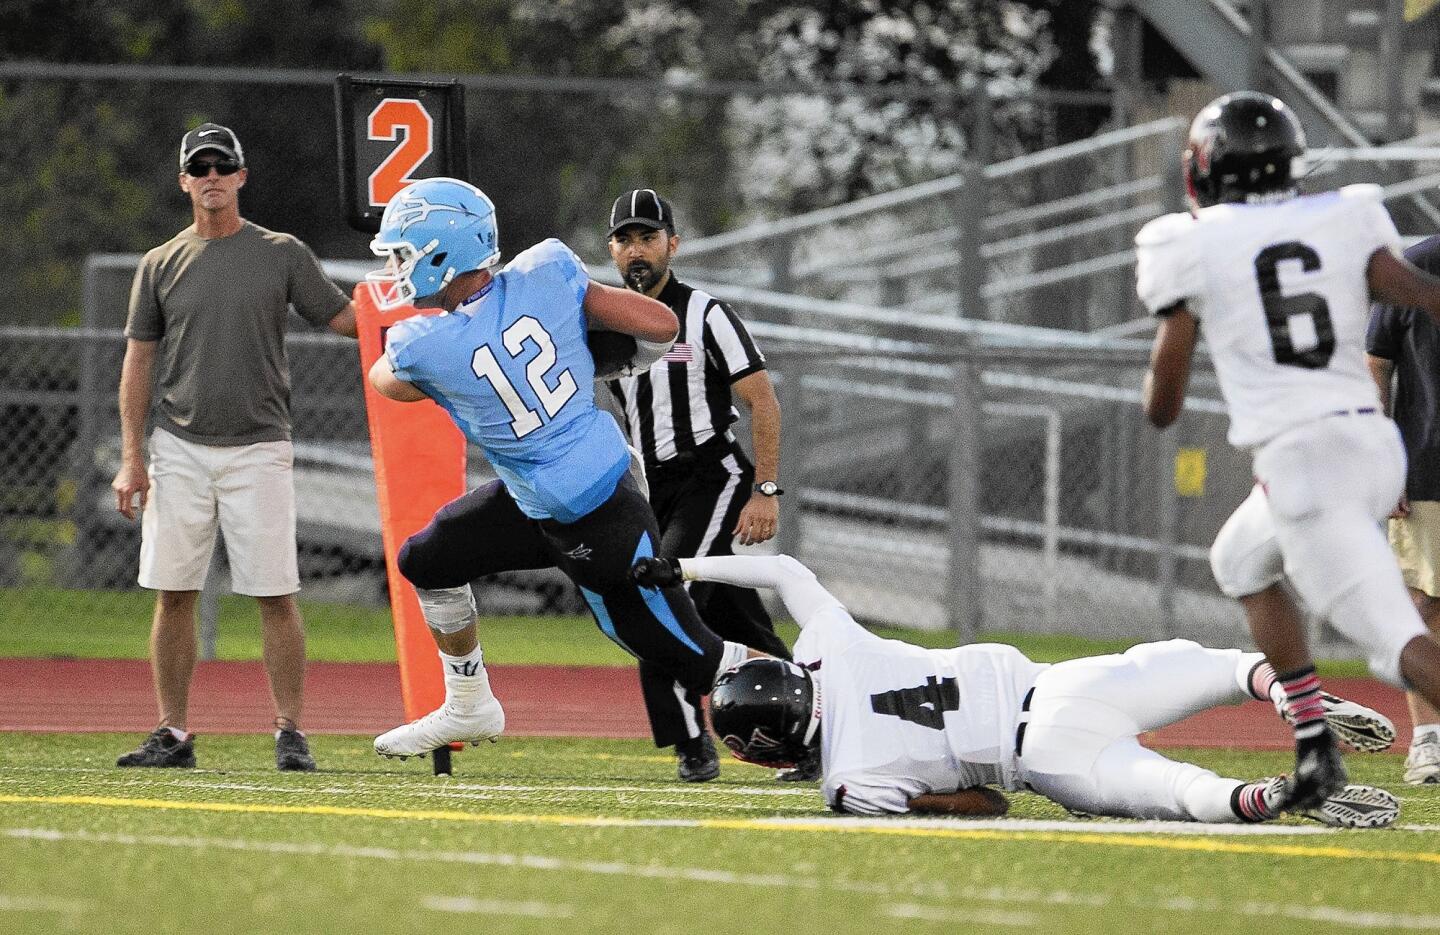 Corona del Mar High's Peter Bush breaks free of a tackle from Palos Verdes' Giorgio Henderson during the season opener at Jim Scott Stadium on Friday. Bush scored a touchdown on the play.